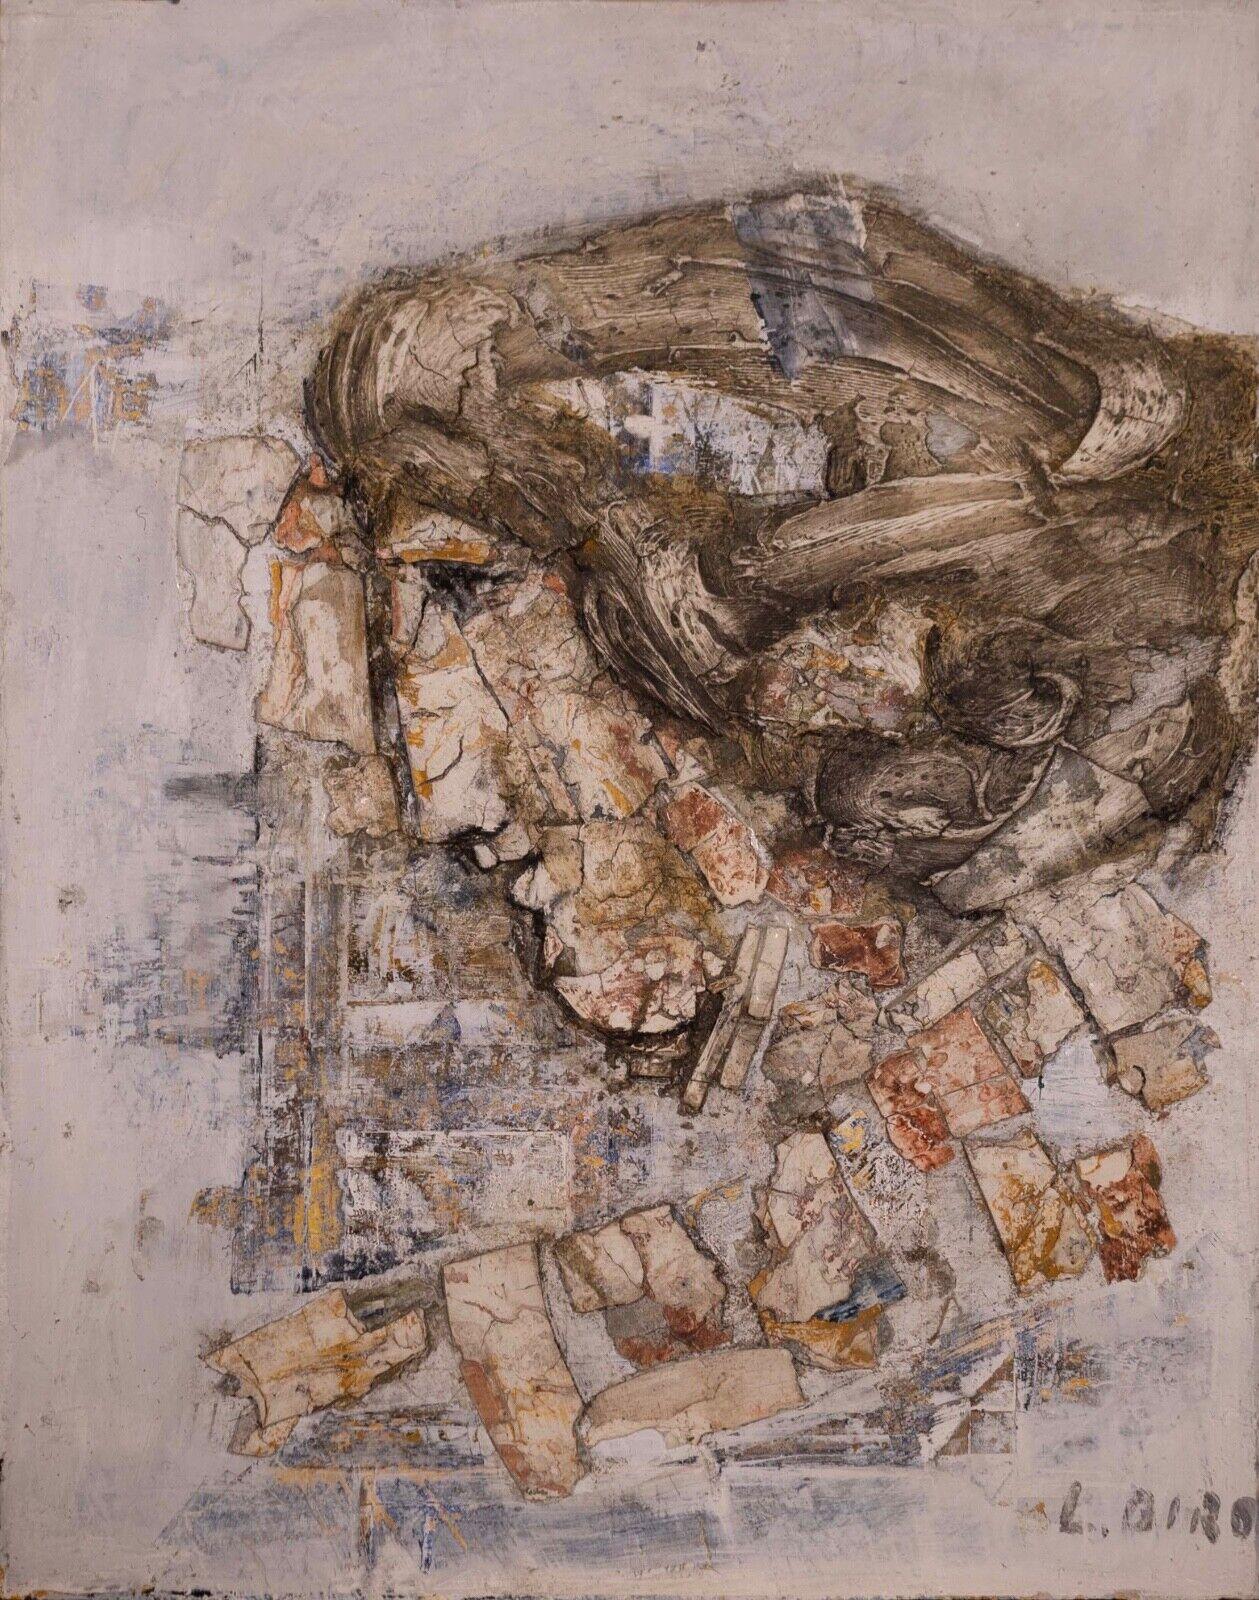 A classical yet modern acrylic painting on Masonite featuring a woman in profile by Ljubo Biro. Signed bottom right. Circa late 1960s to early 1970s. A unique textural painting with a rich impasto. Biro was a self taught Yugoslav artist that settled